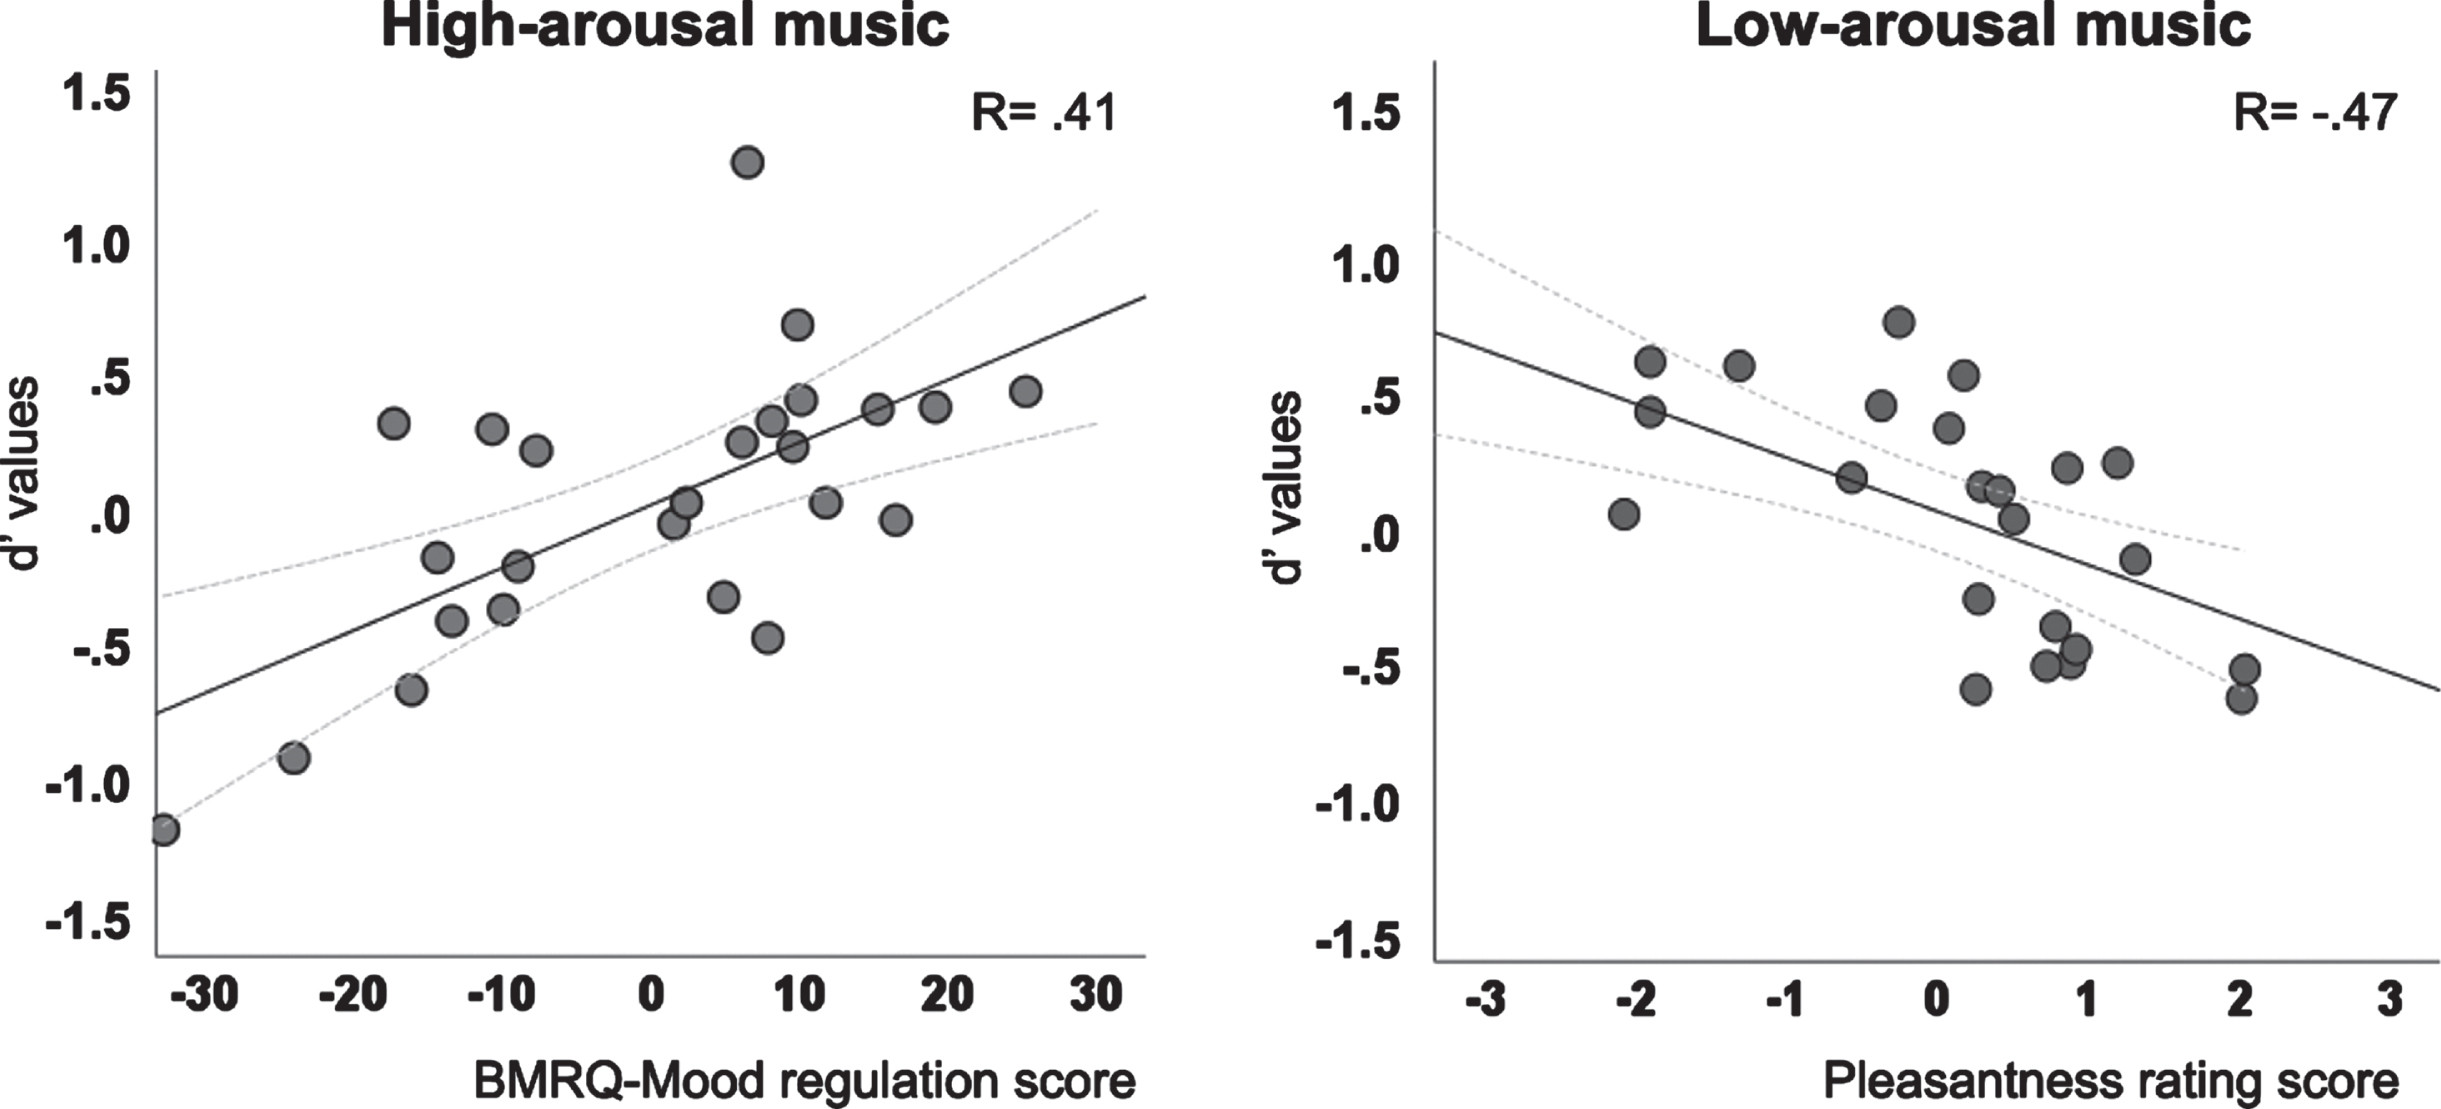 Partial regression plots for high-arousal music and BMRQ scores and for low-arousal music and pleasantness ratings scores.